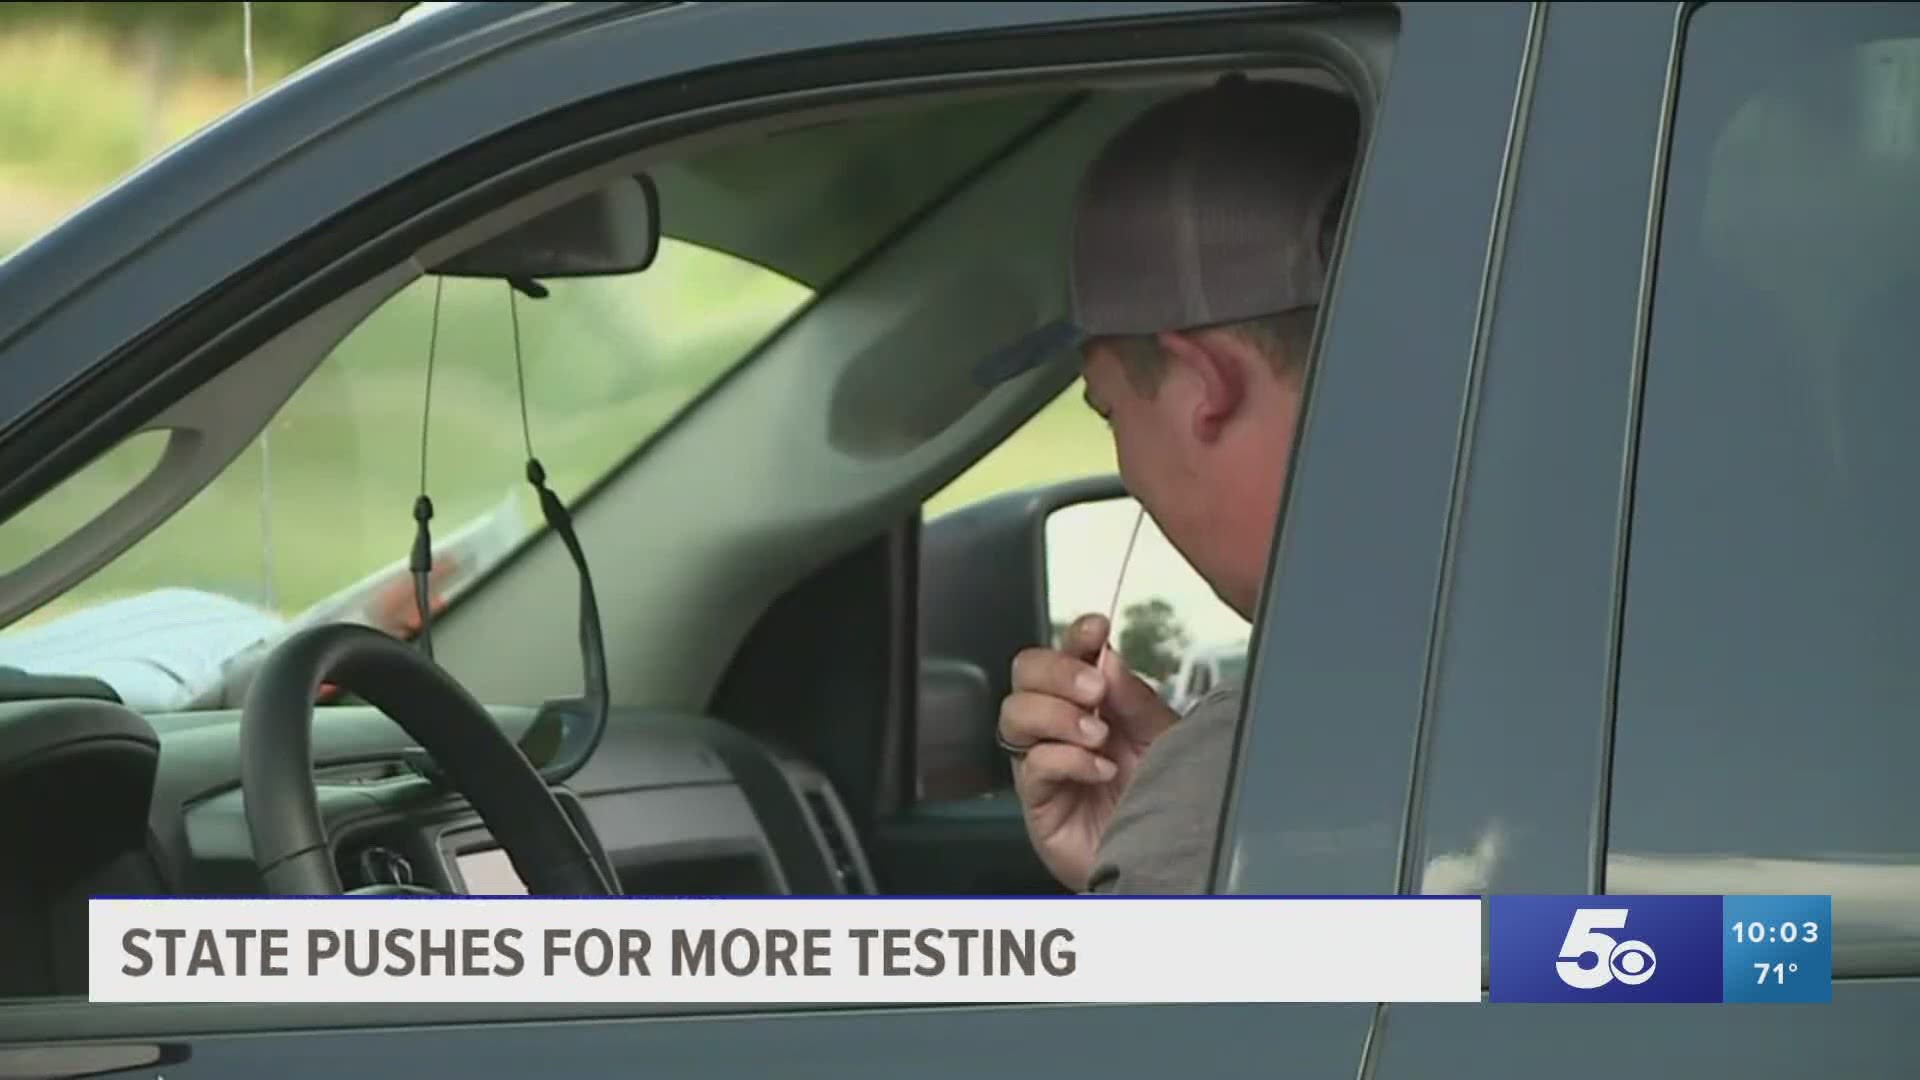 In an attempt to ramp up COVID-19 testing across Arkansas, the state is partnering with Baptist Health Hospital to process more tests per day. https://bit.ly/2ZjJLTW